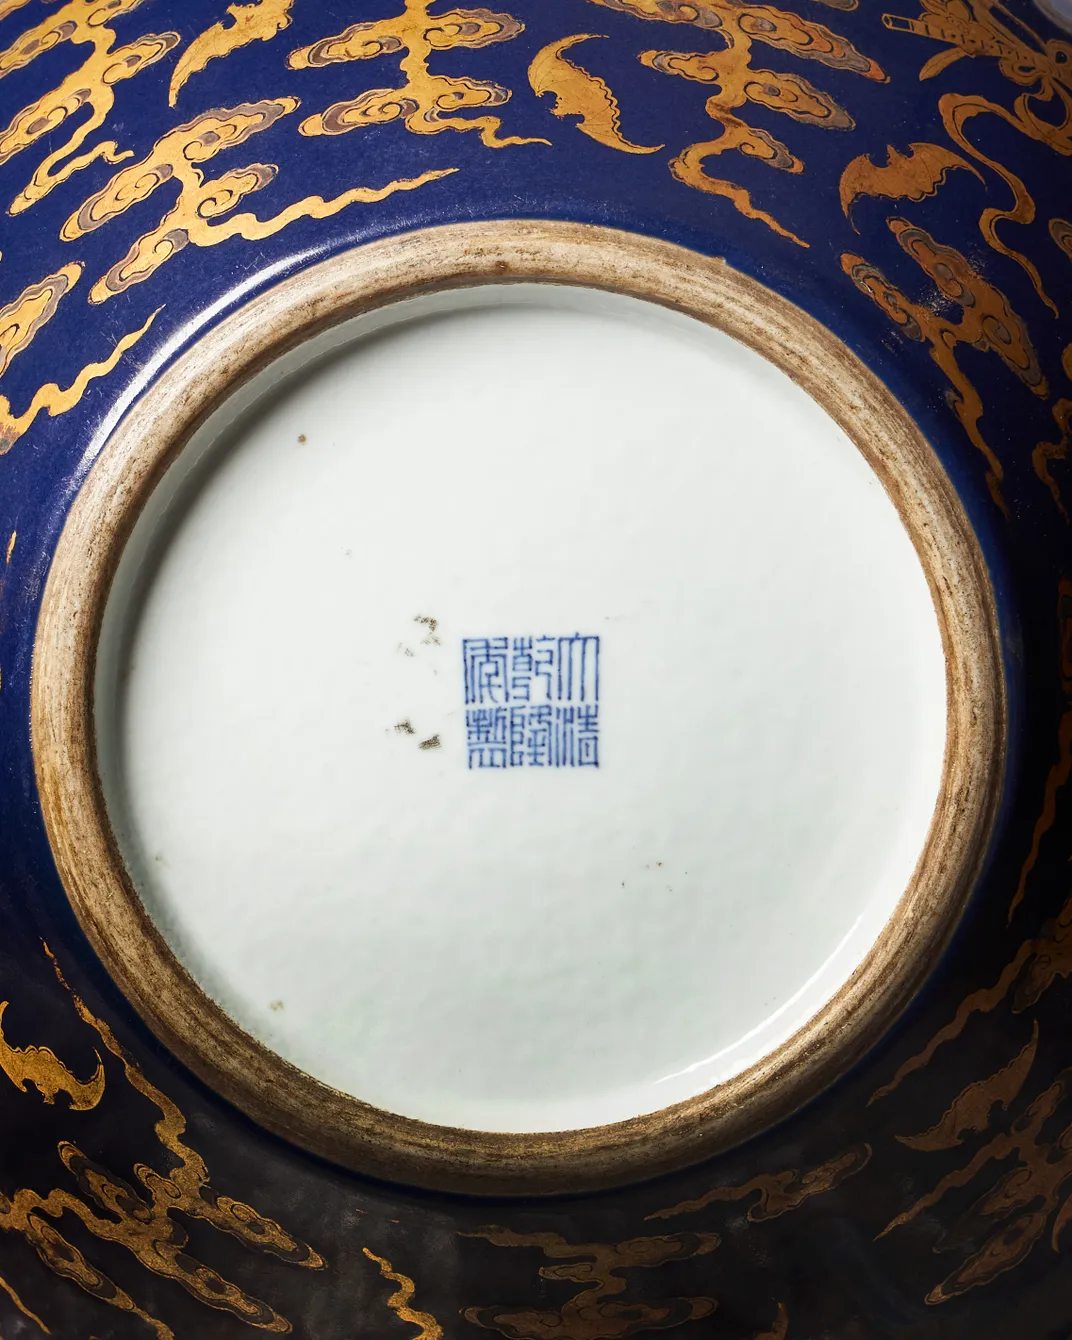 Bottom of the vase showing a Chinese symbol